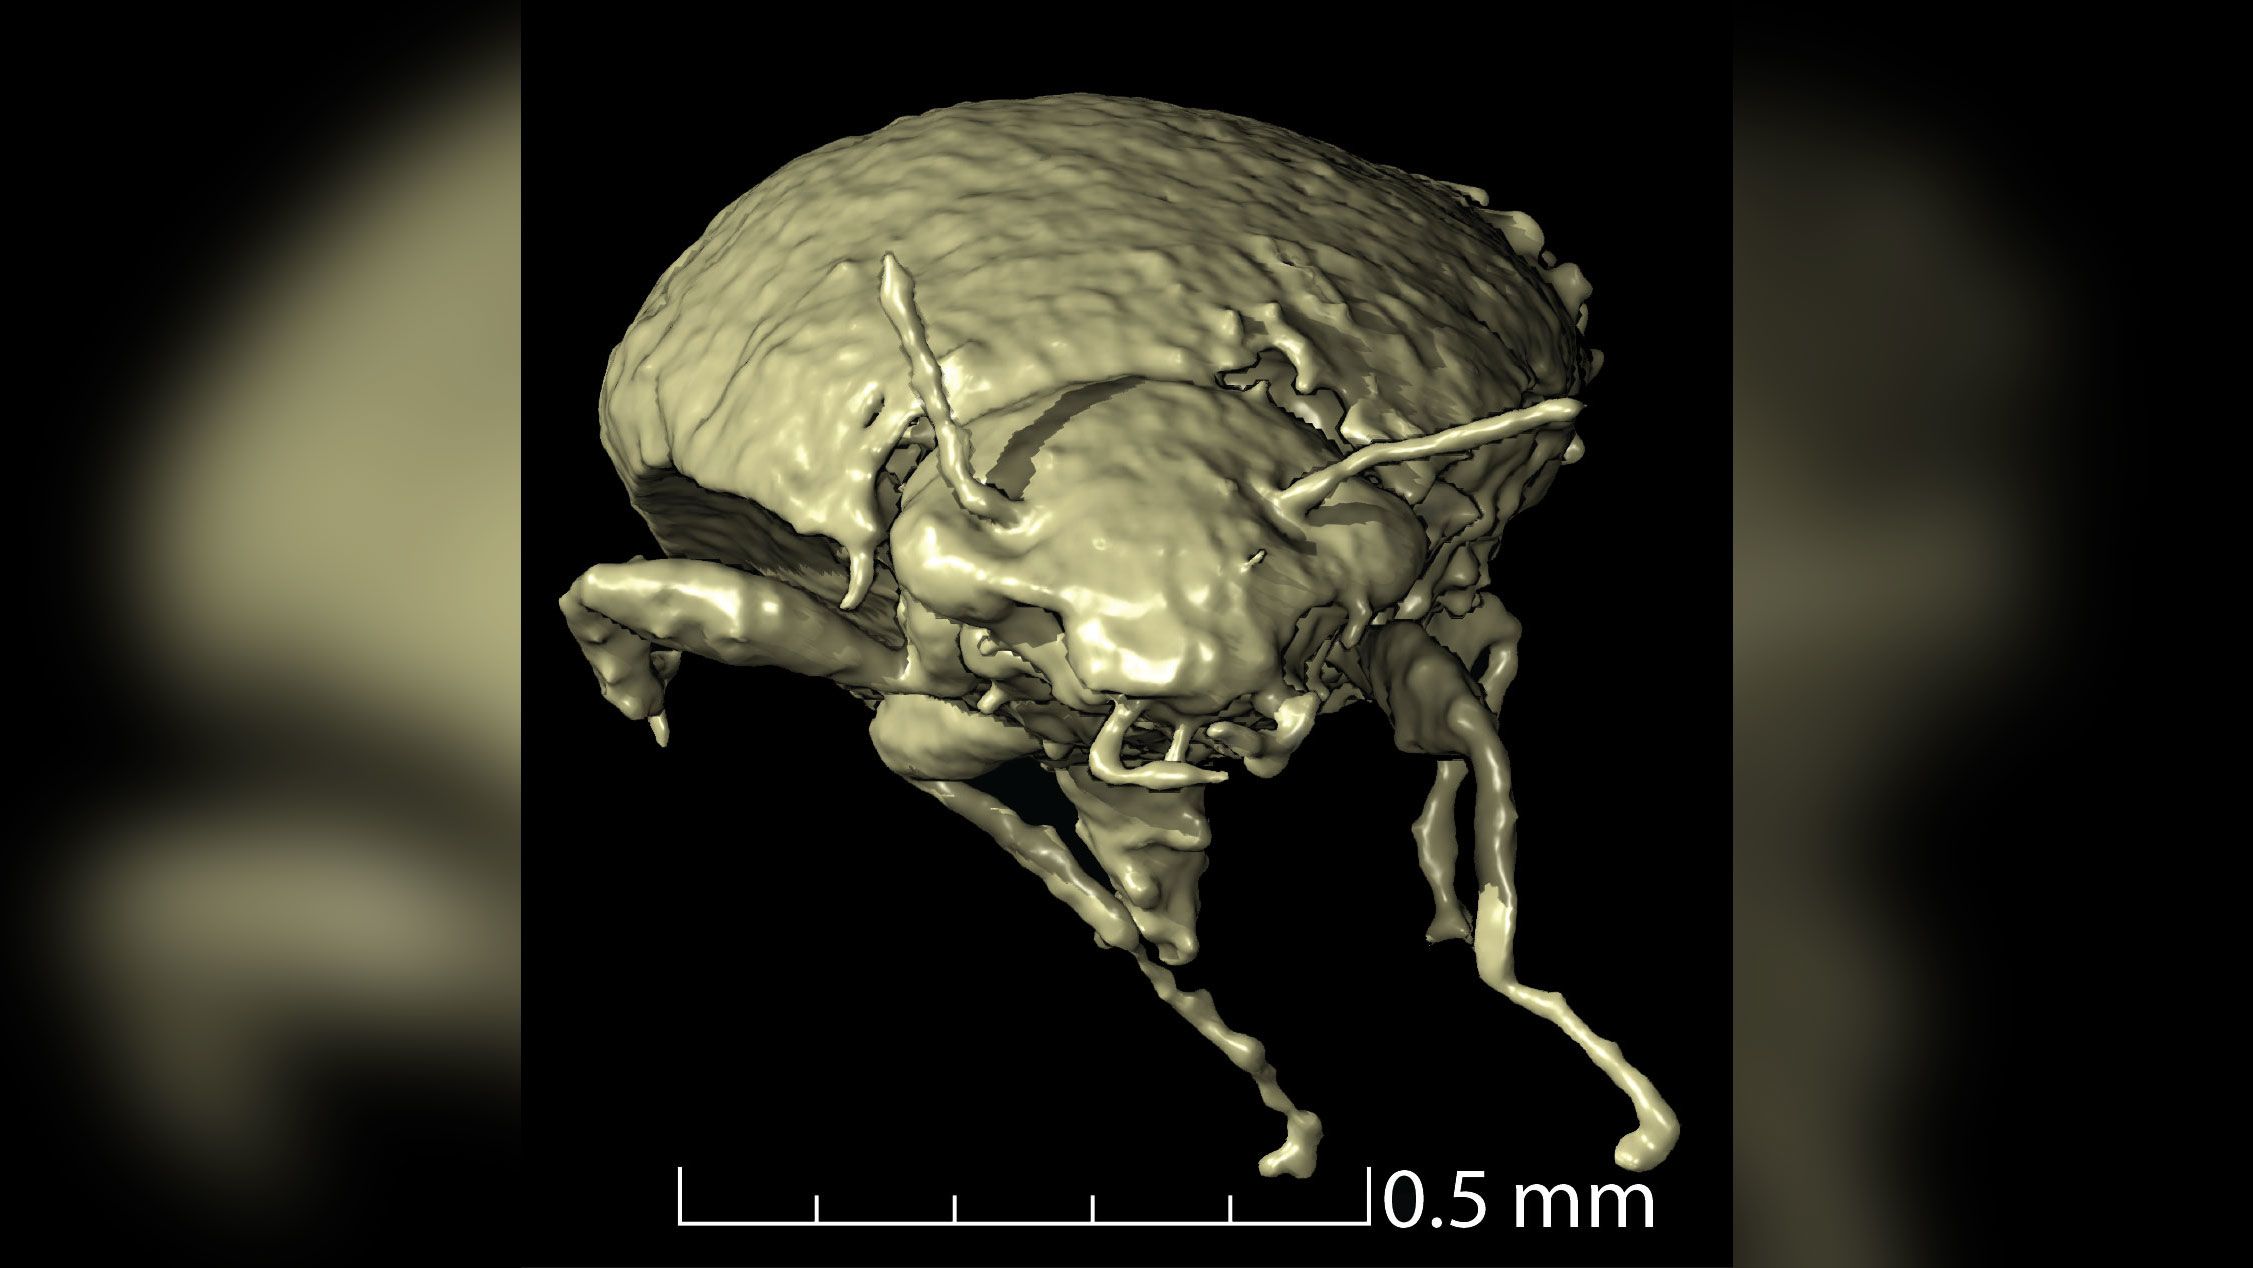 Beetle species newly discovered in fossilized feces | CNN